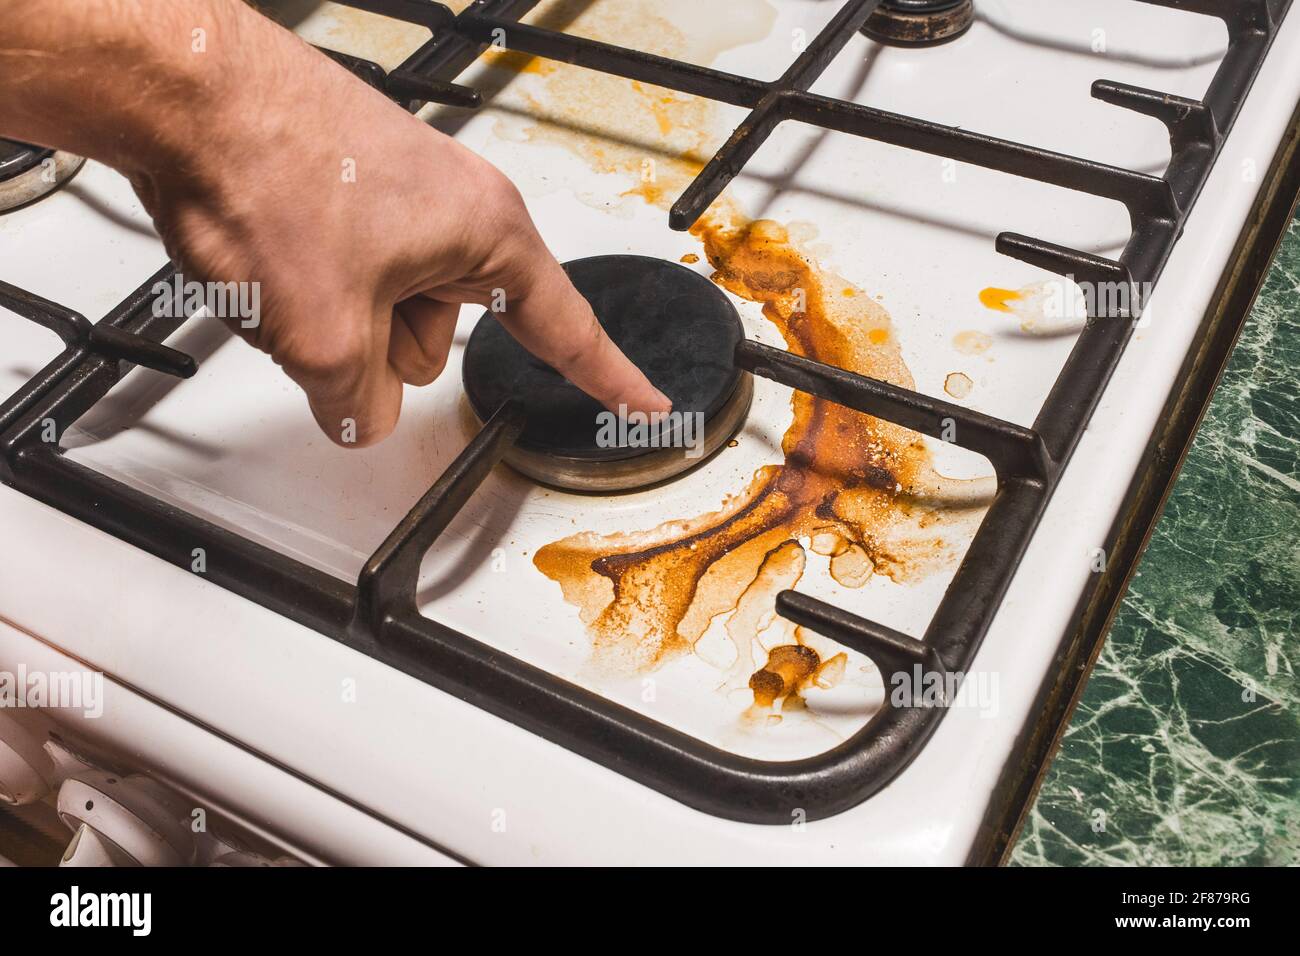 https://c8.alamy.com/comp/2F879RG/the-guys-hand-points-a-finger-at-the-dirty-plaque-on-the-gas-stove-after-home-cooking-in-the-kitchen-close-up-2F879RG.jpg